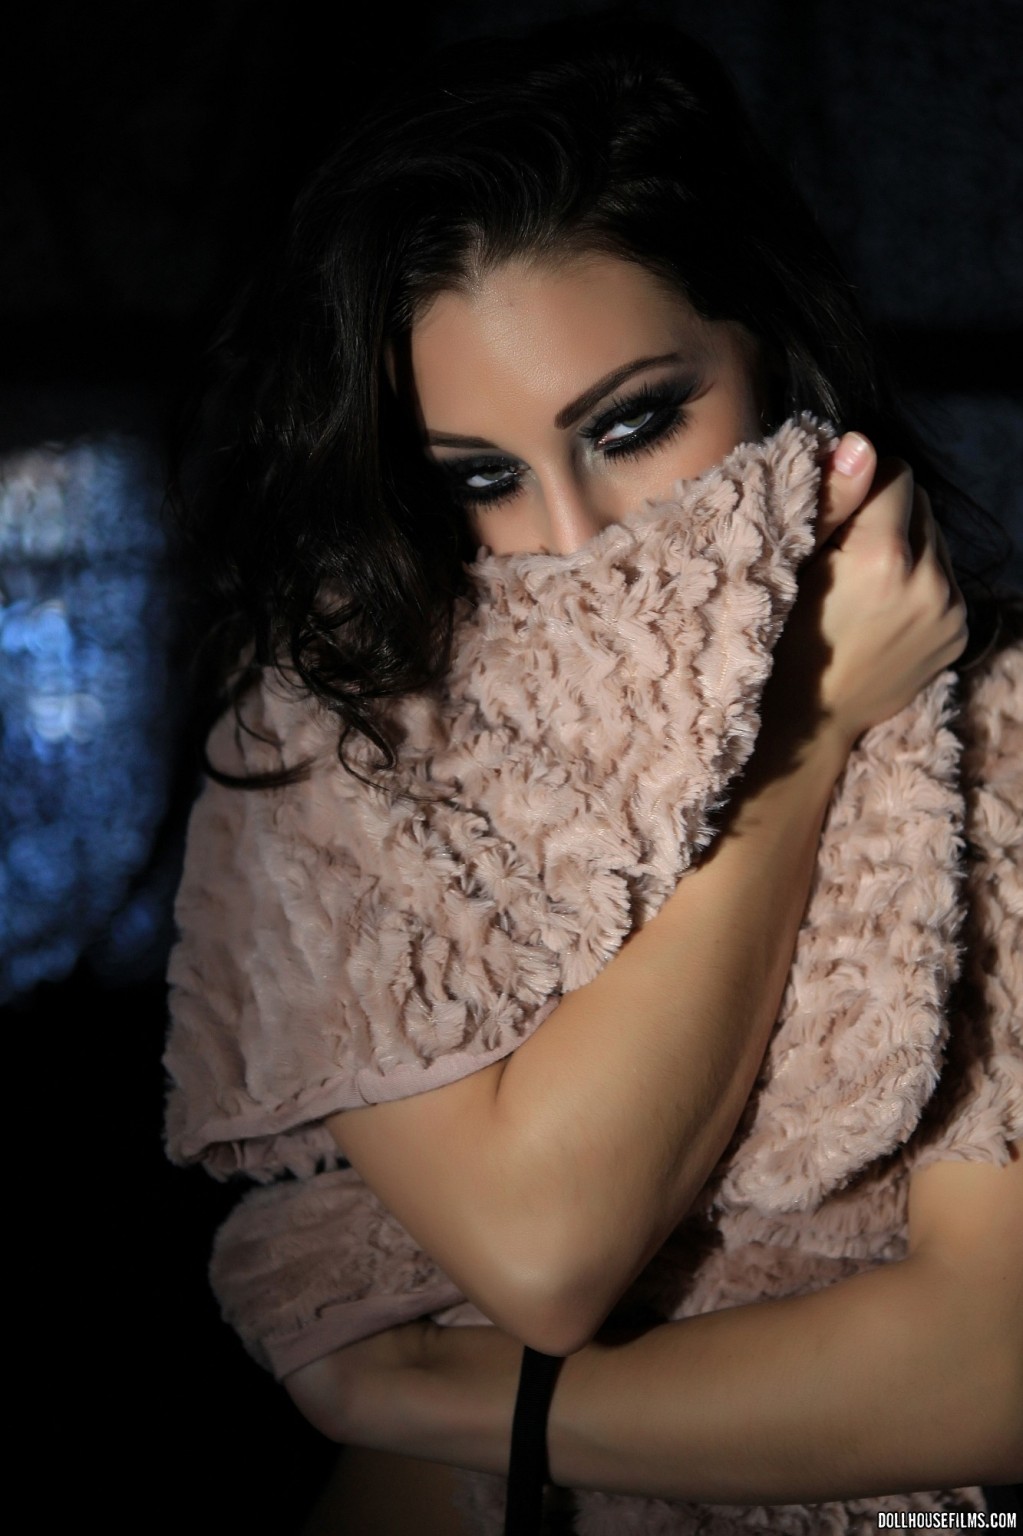 Gracie Glam posing seductively as she toys with a Scarf